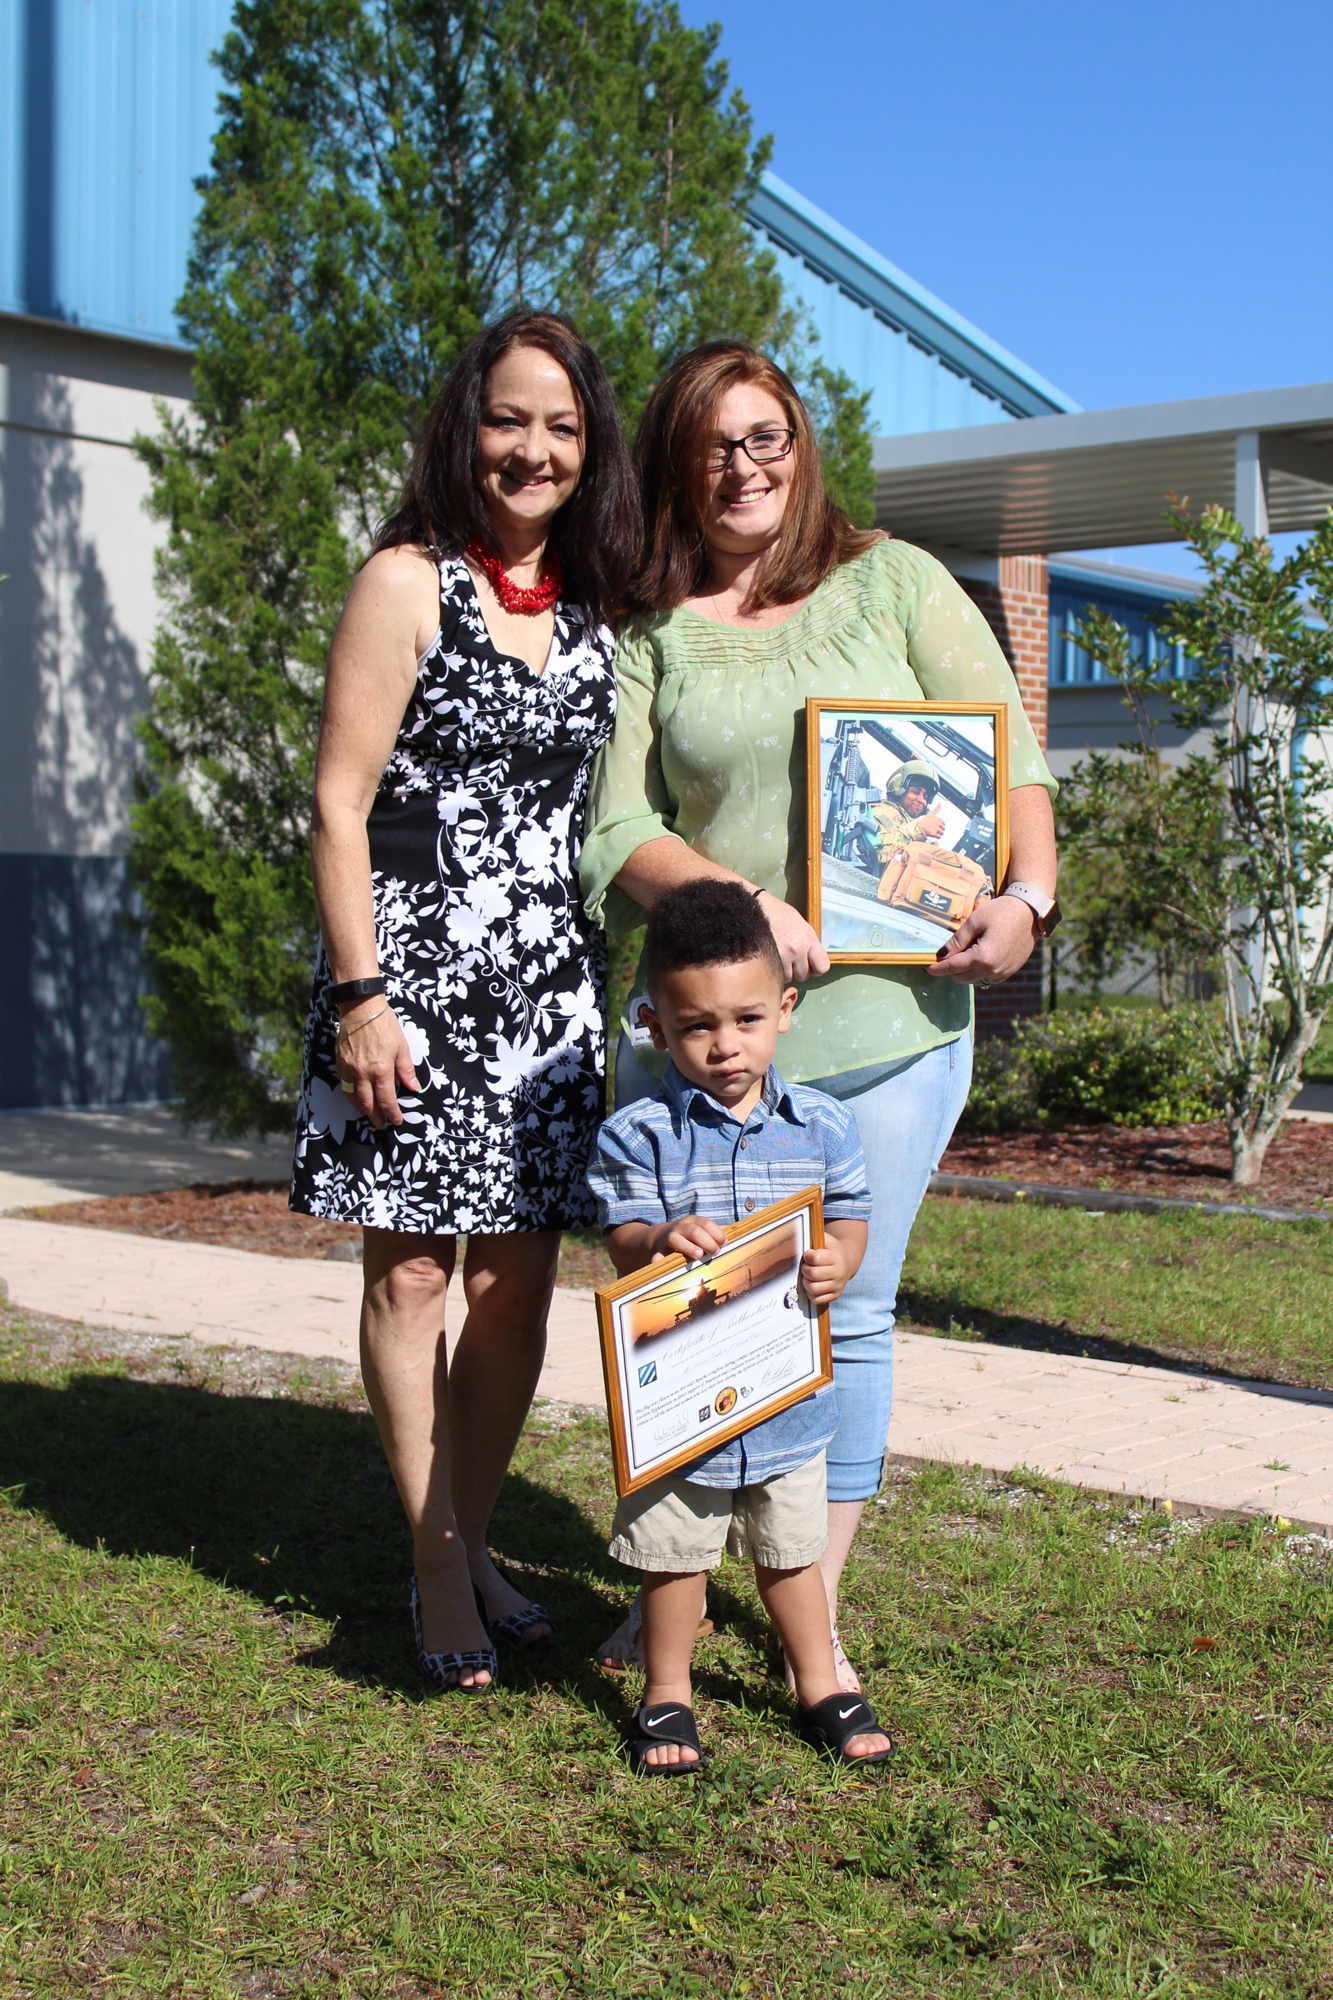 Belle Terre Elementary teacher Donna Giglio stands with her niece Michelle Prevot and Prevot's son Brantley. Courtesy photo